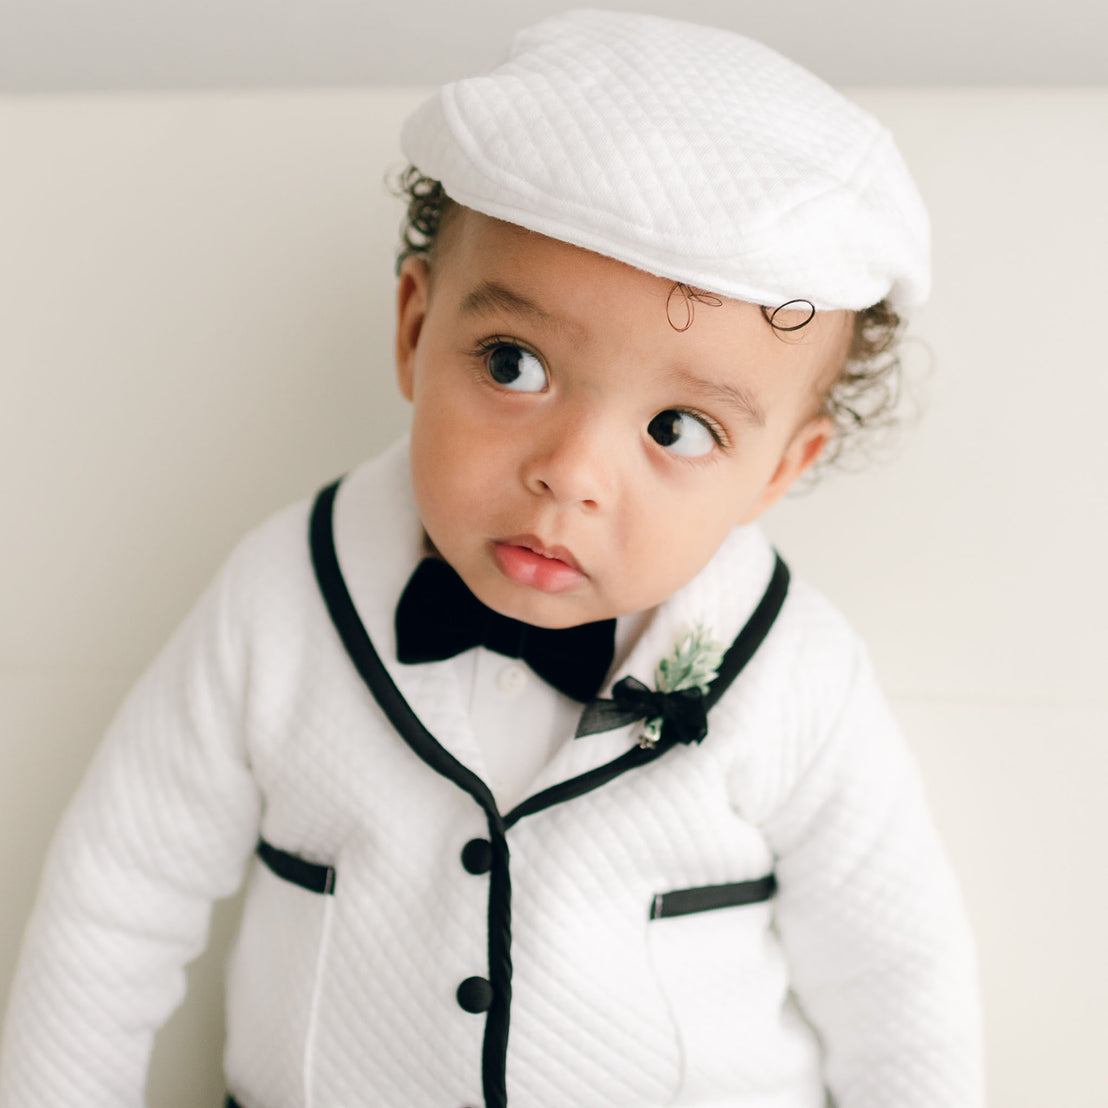 Baby boy wearing the white James 3-Piece Suit, including the jacket, pants, and onesie (with matching Newsboy Cap).